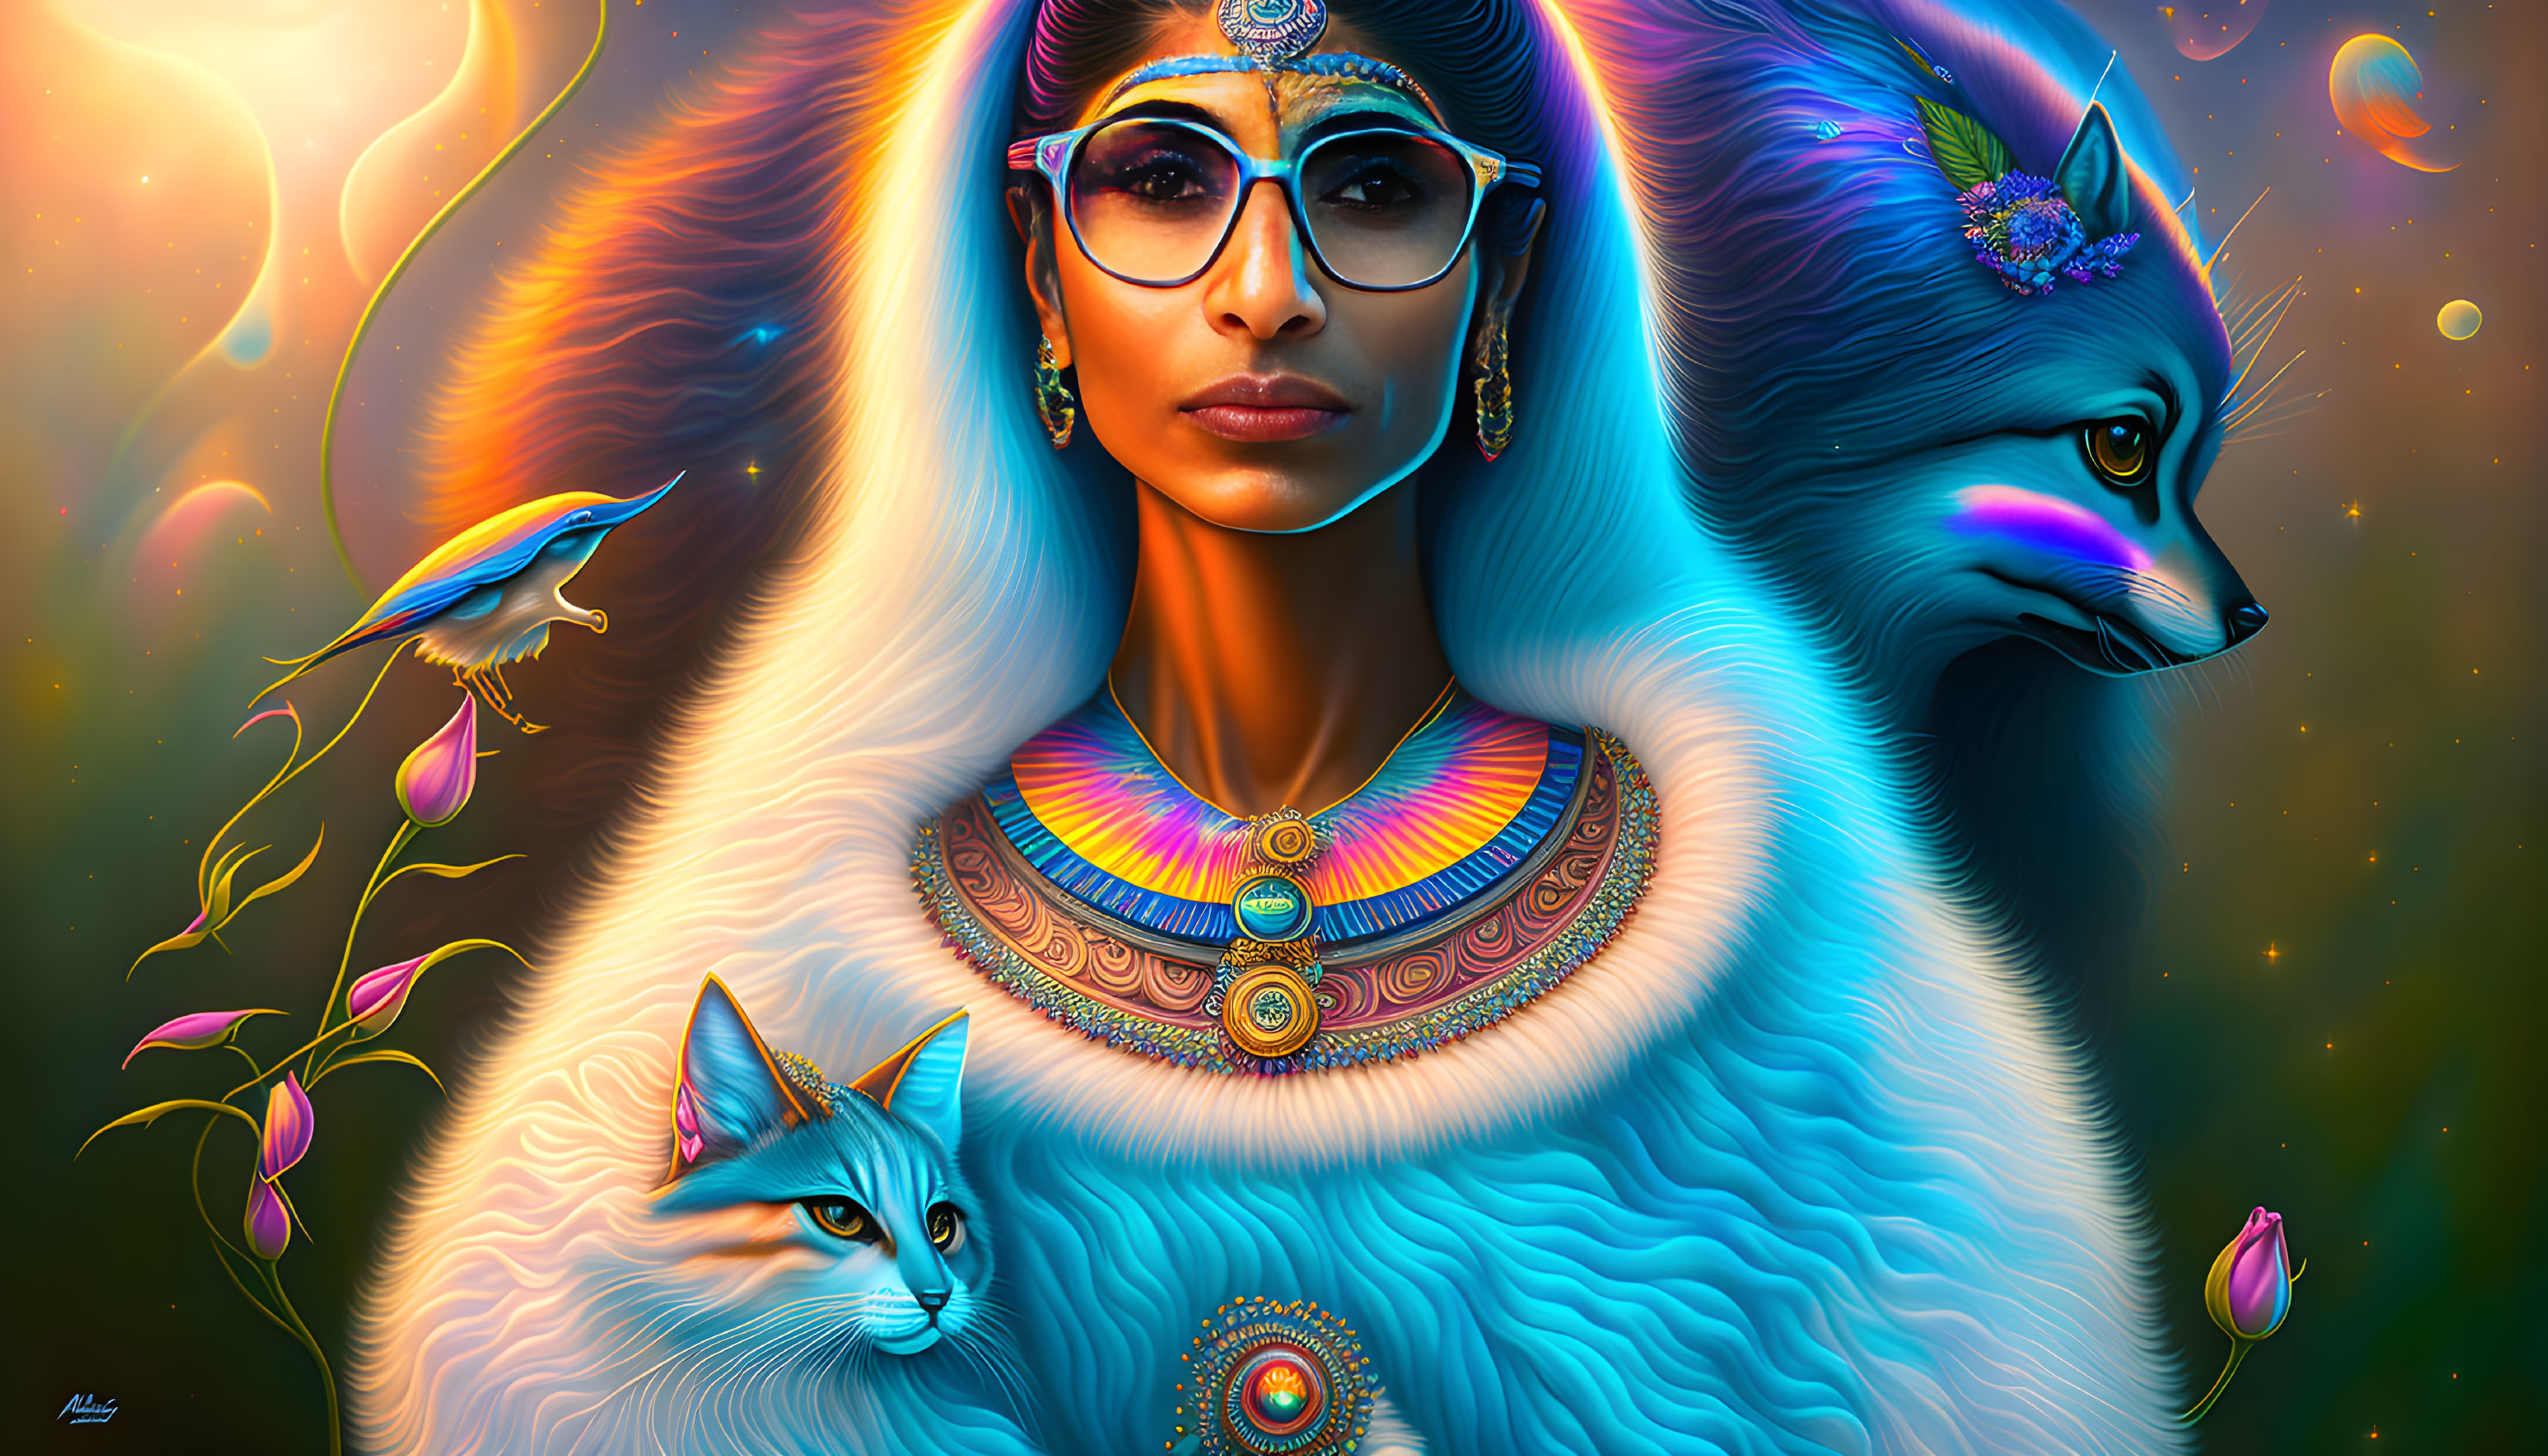 Colorful Digital Artwork: Stylized Egyptian-Inspired Woman with Animals